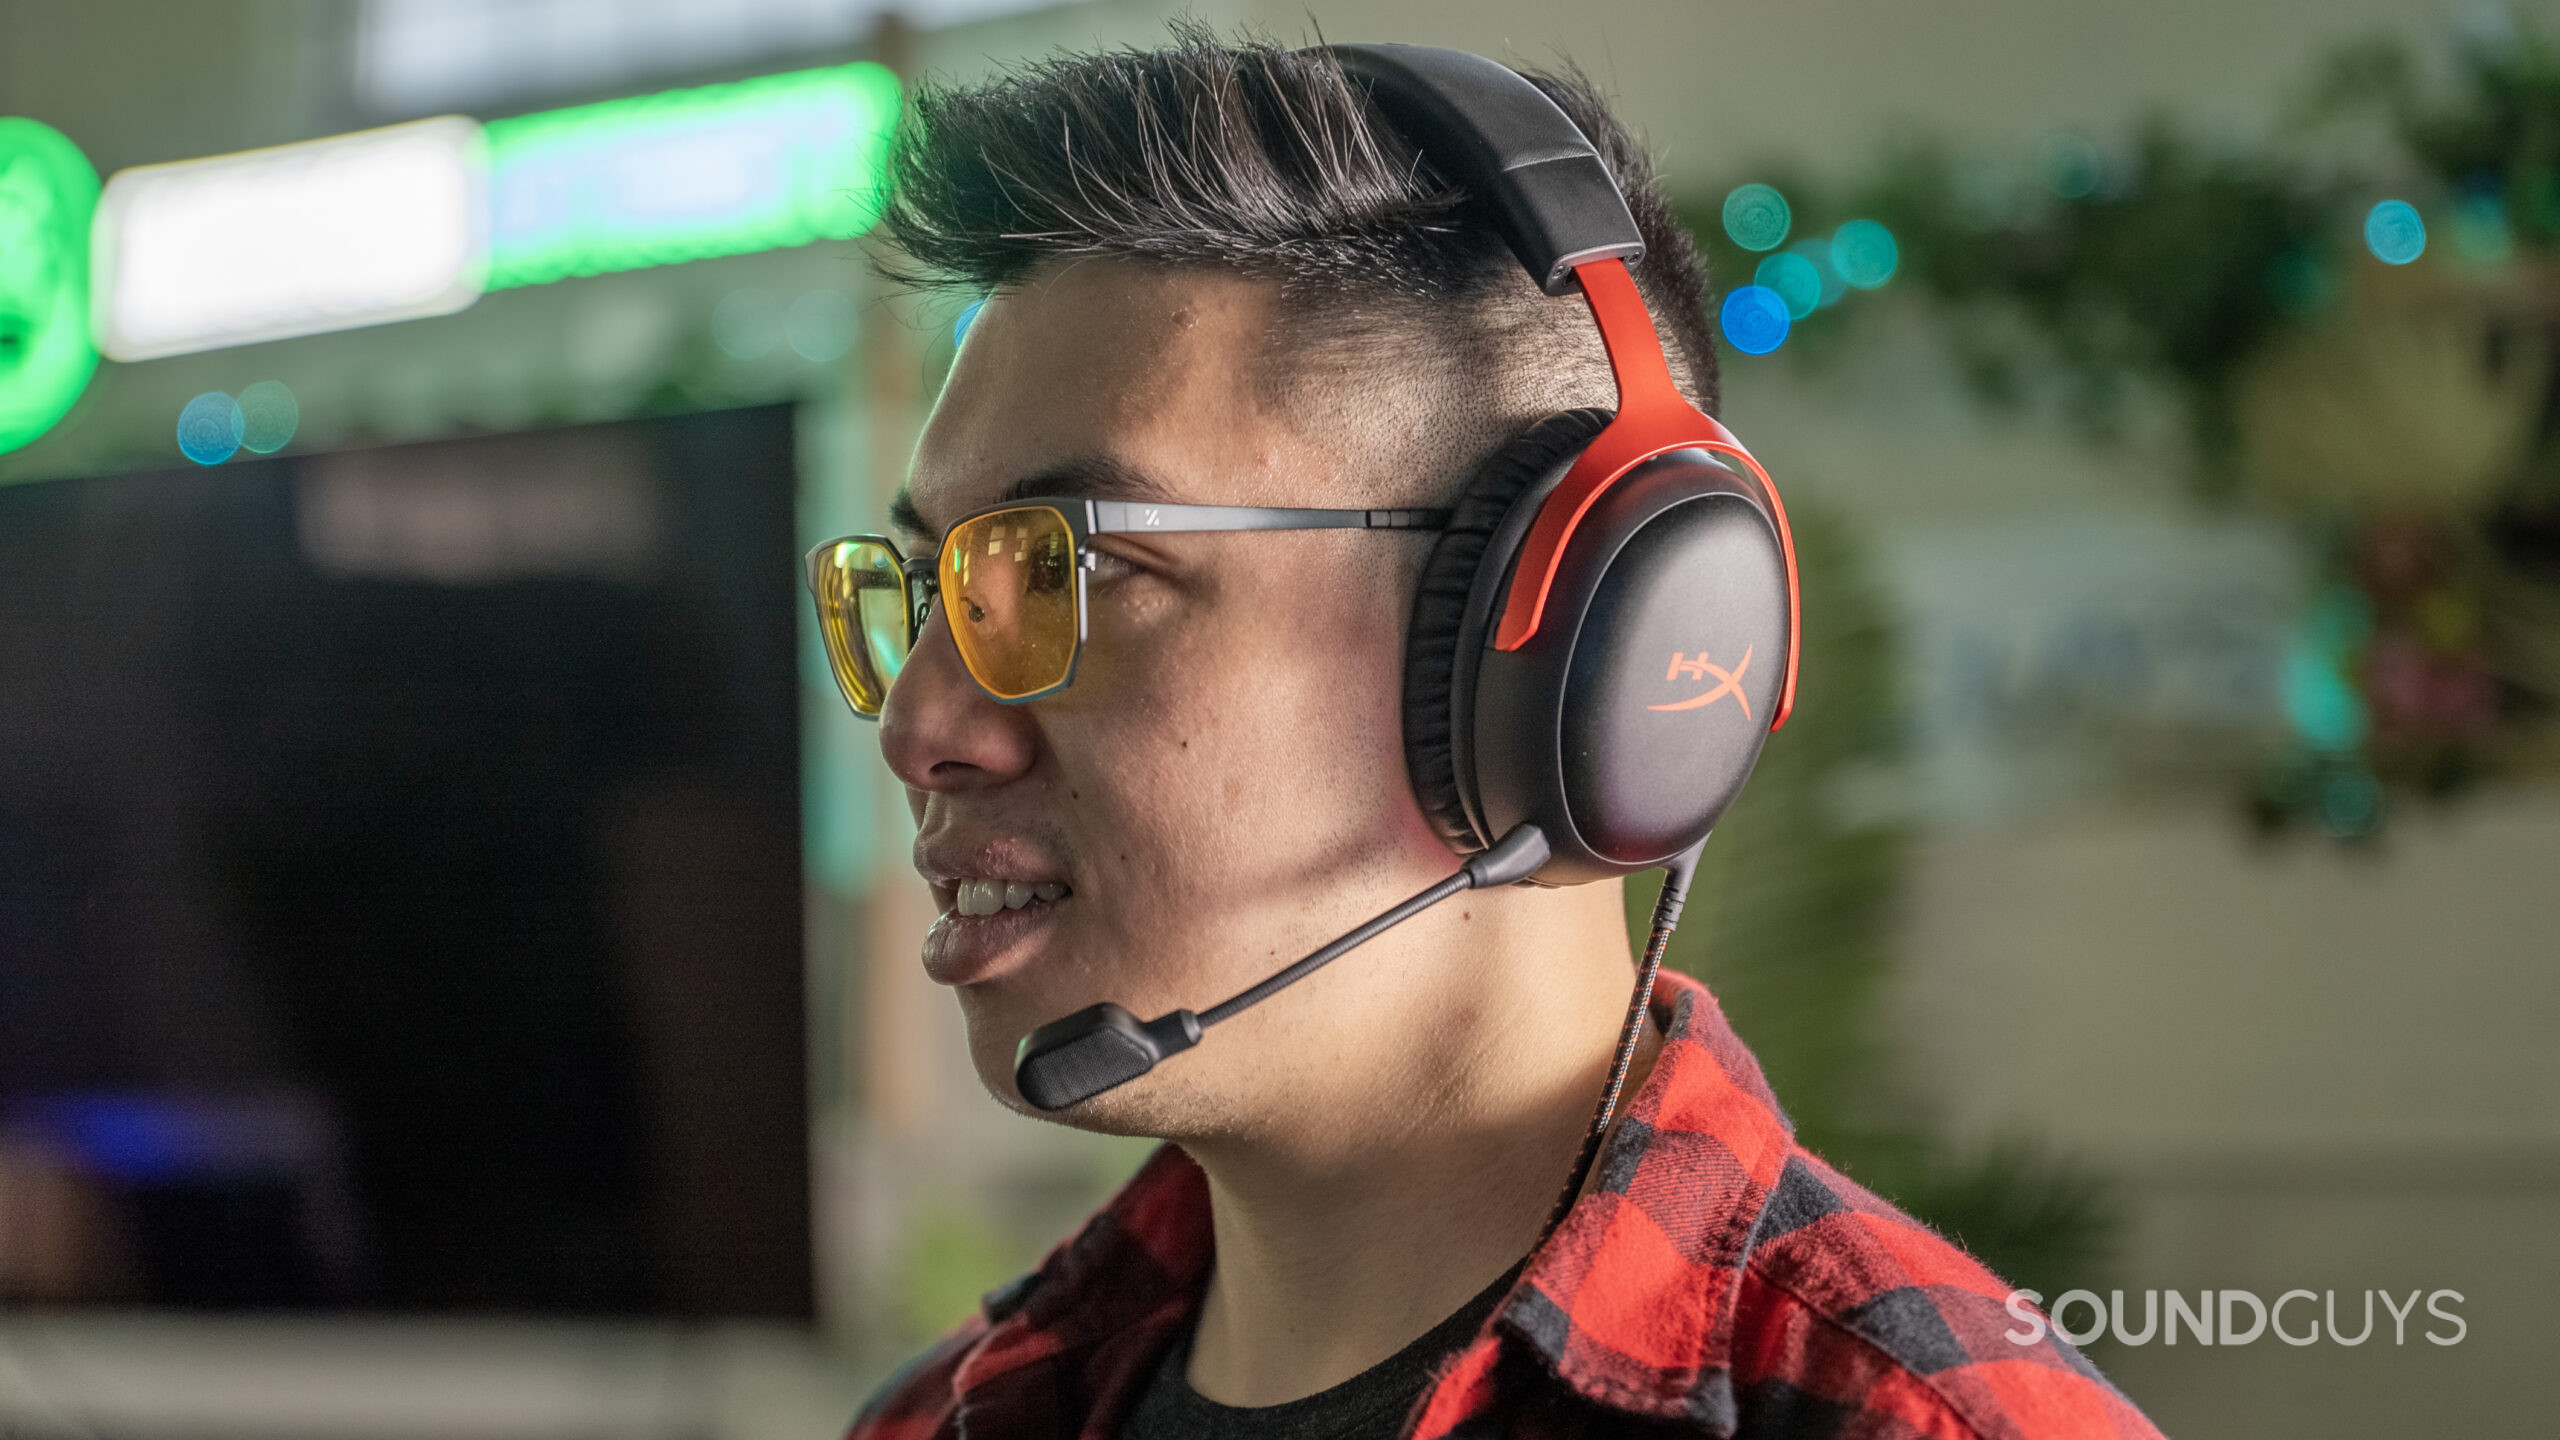 The HyperX Cloud III being worn by a person.